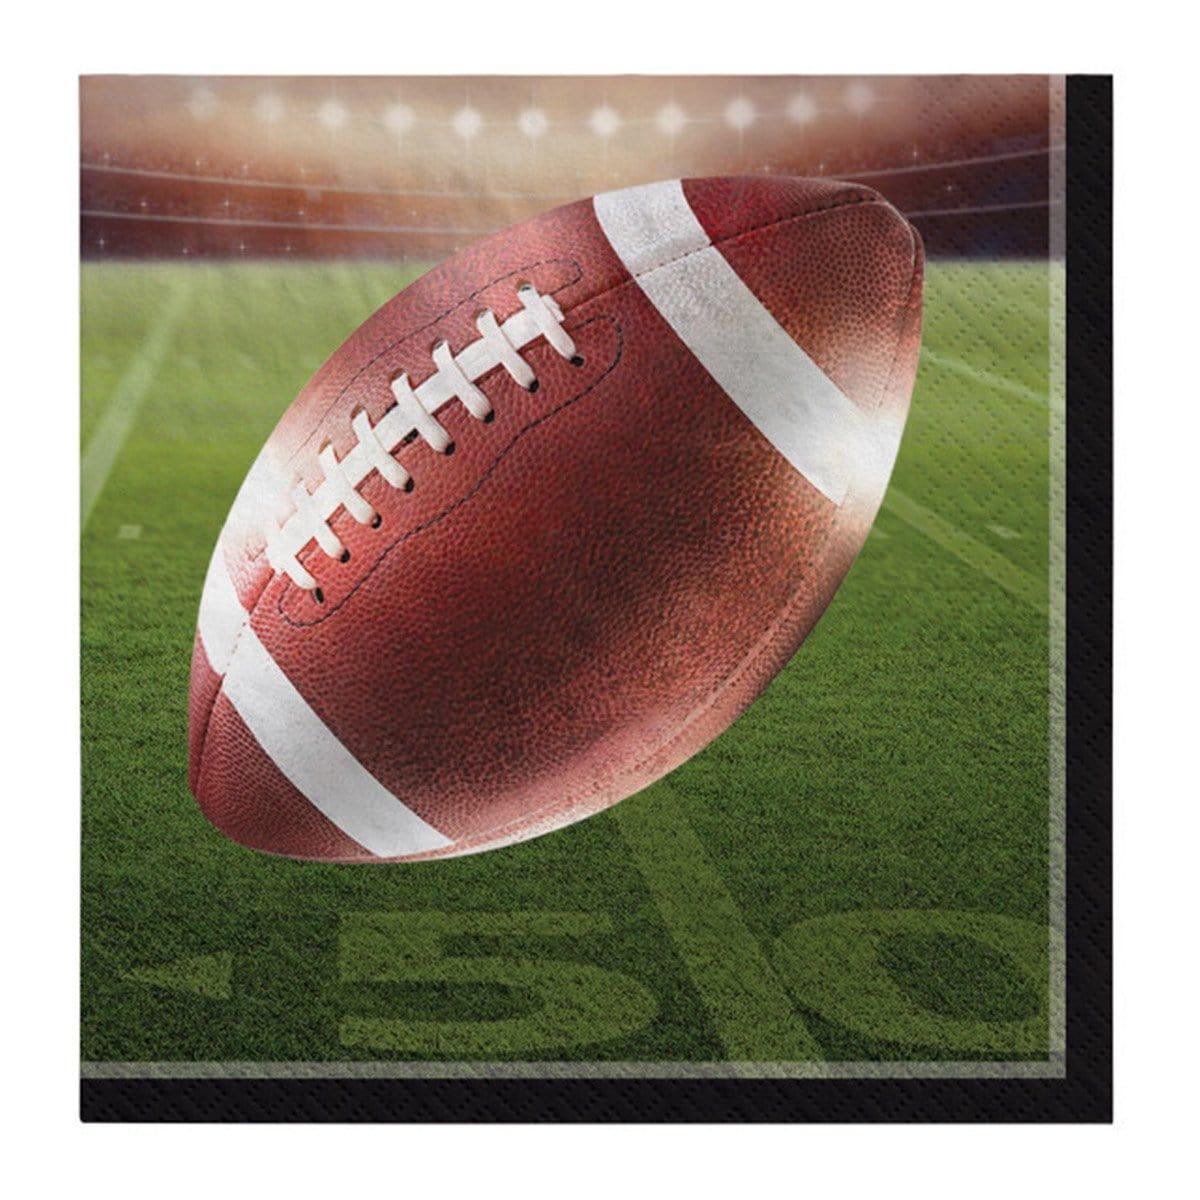 Buy Superbowl Game On Beverage Napkins, 36 Count sold at Party Expert